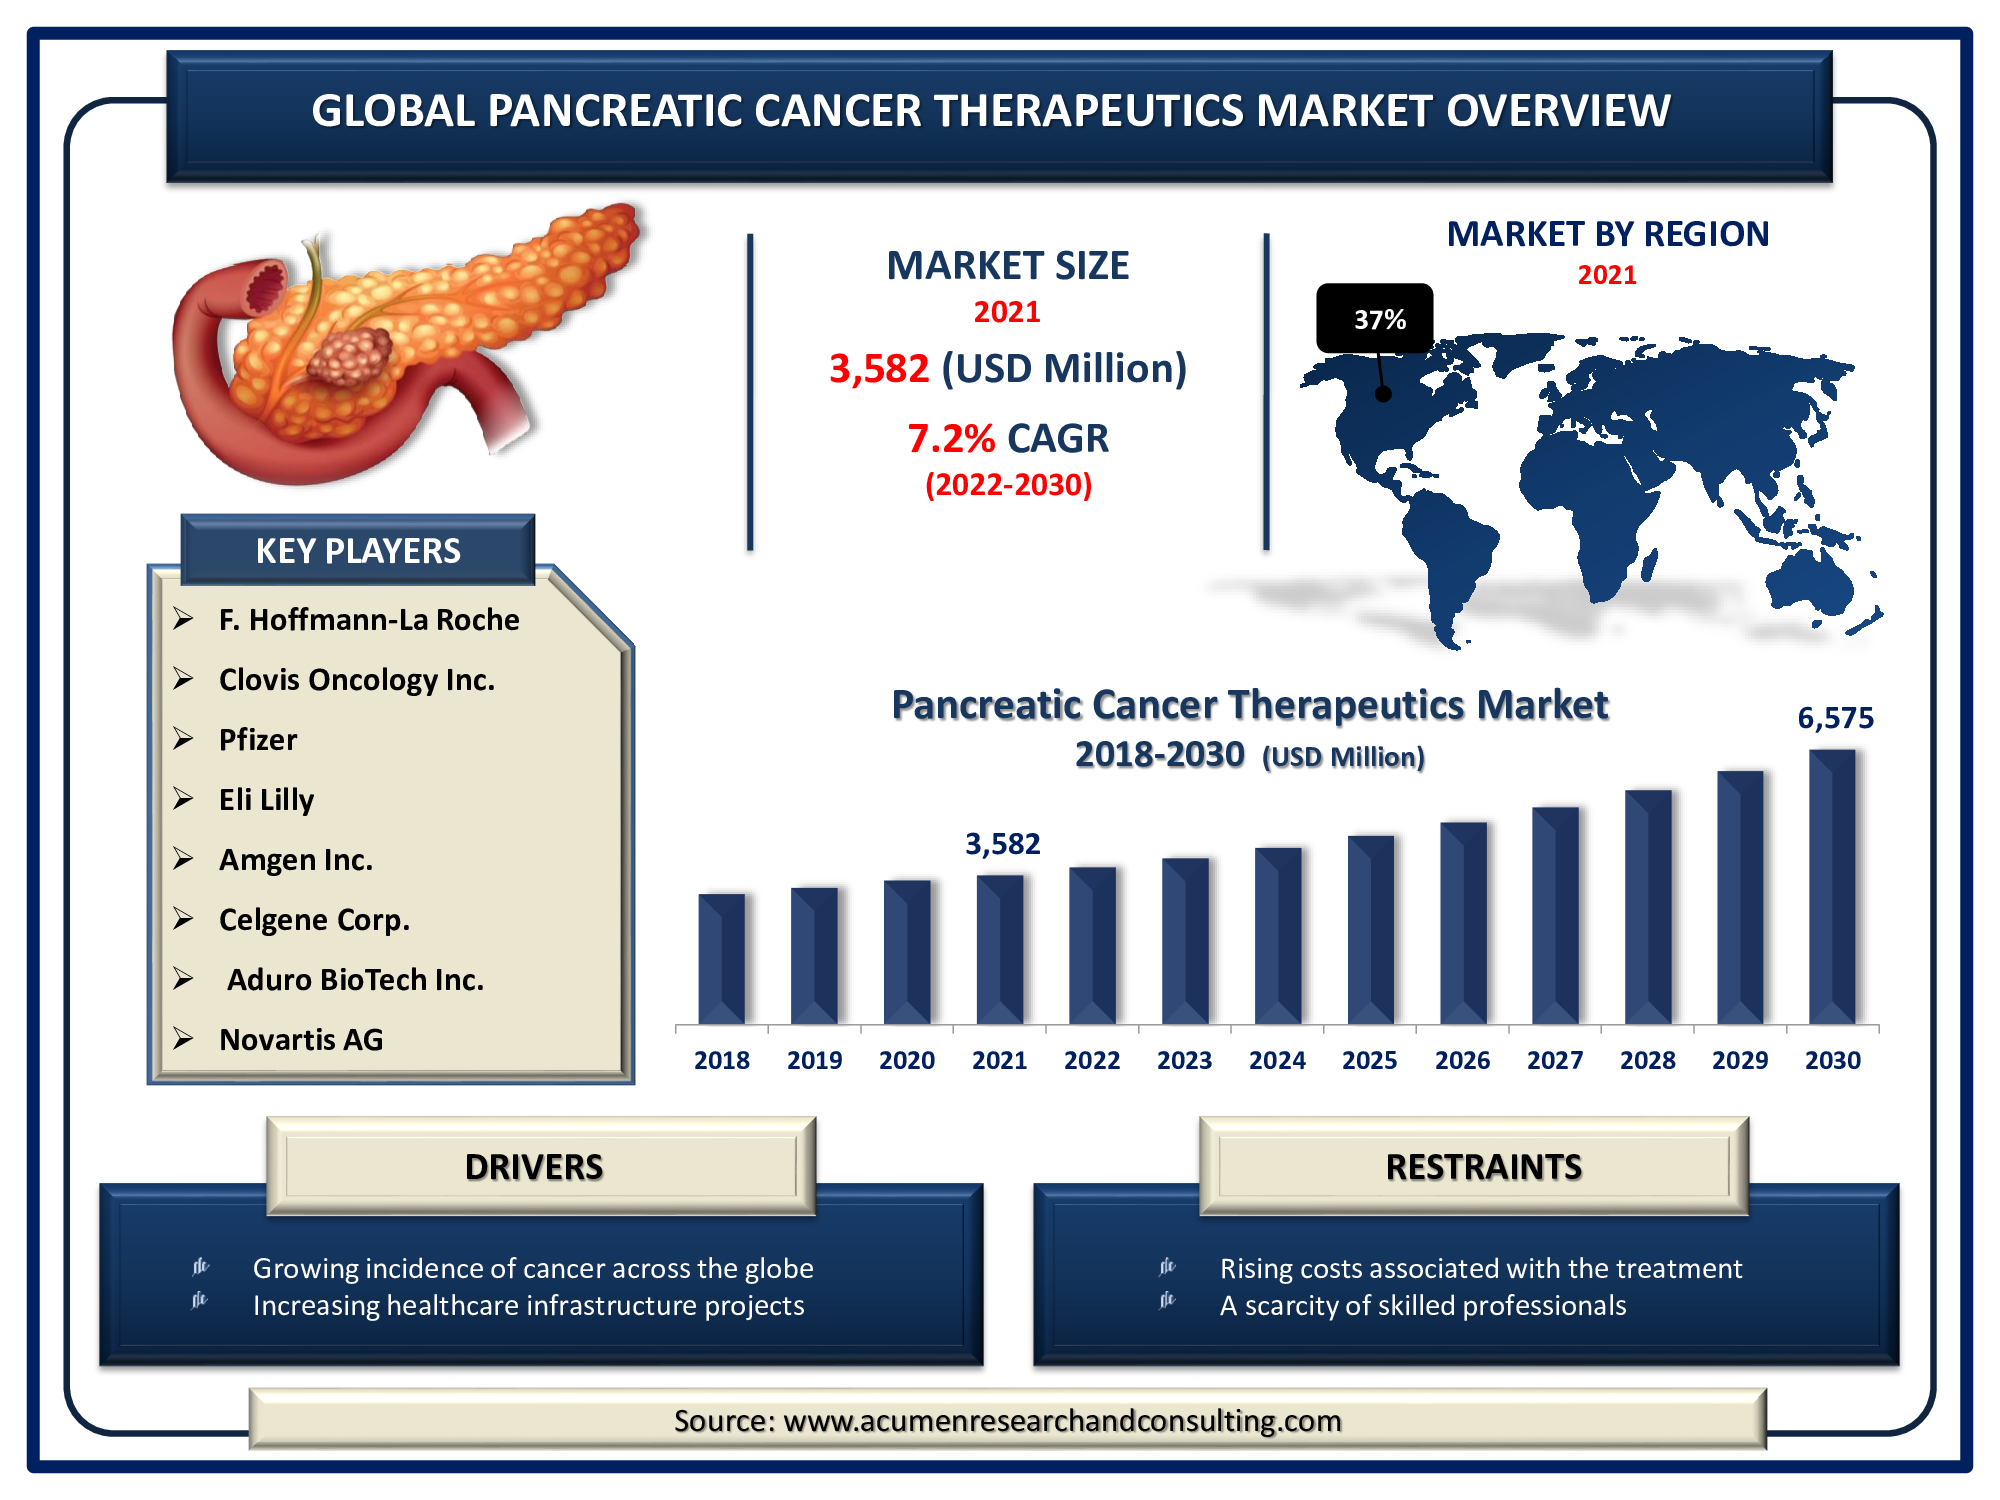 Pancreatic Cancer Therapeutics Market is predicted to be worth USD 6,575 Million by 2030, with a CAGR of 7.2%